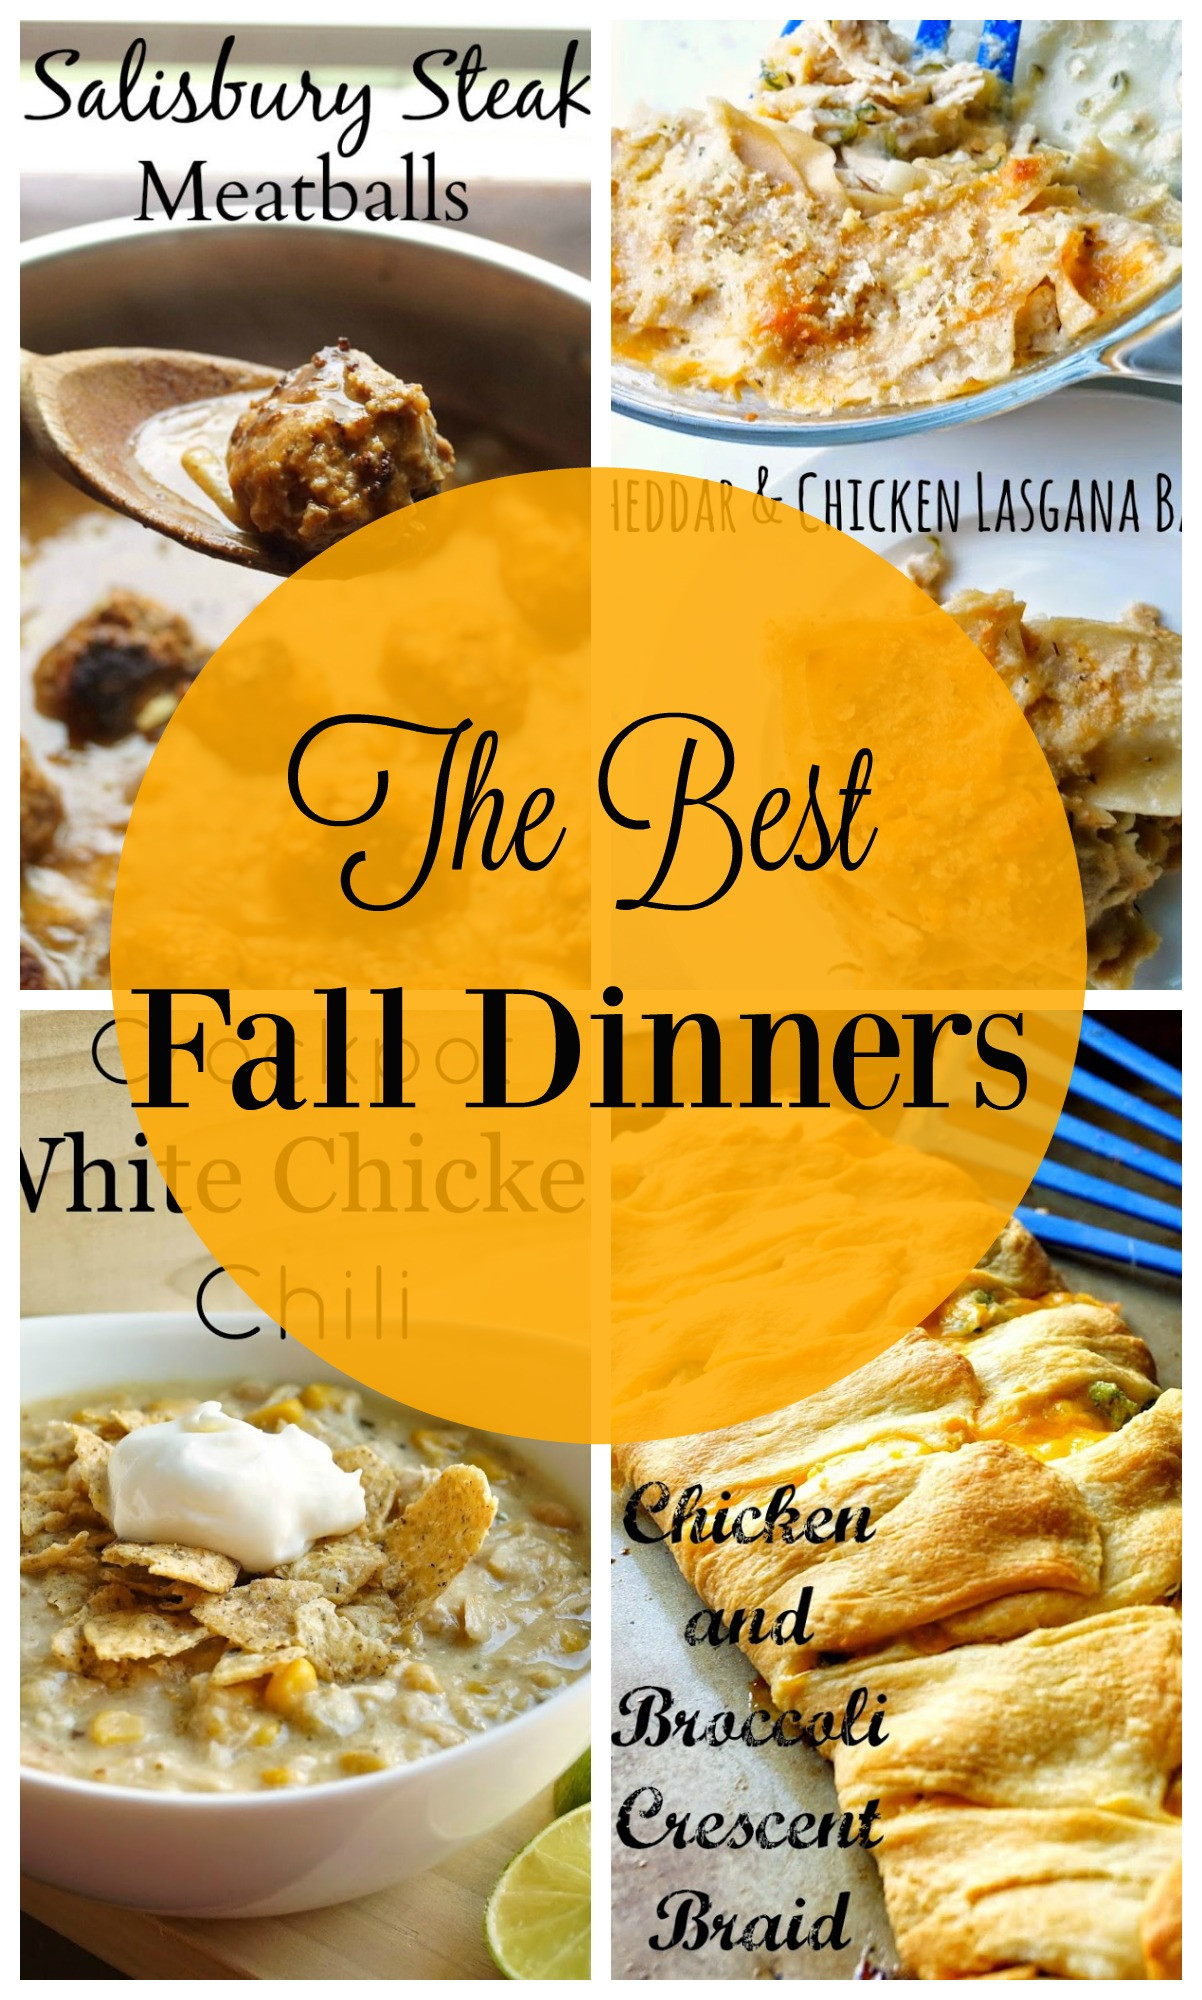 Best Fall Dinners
 The Best Fall Dinners